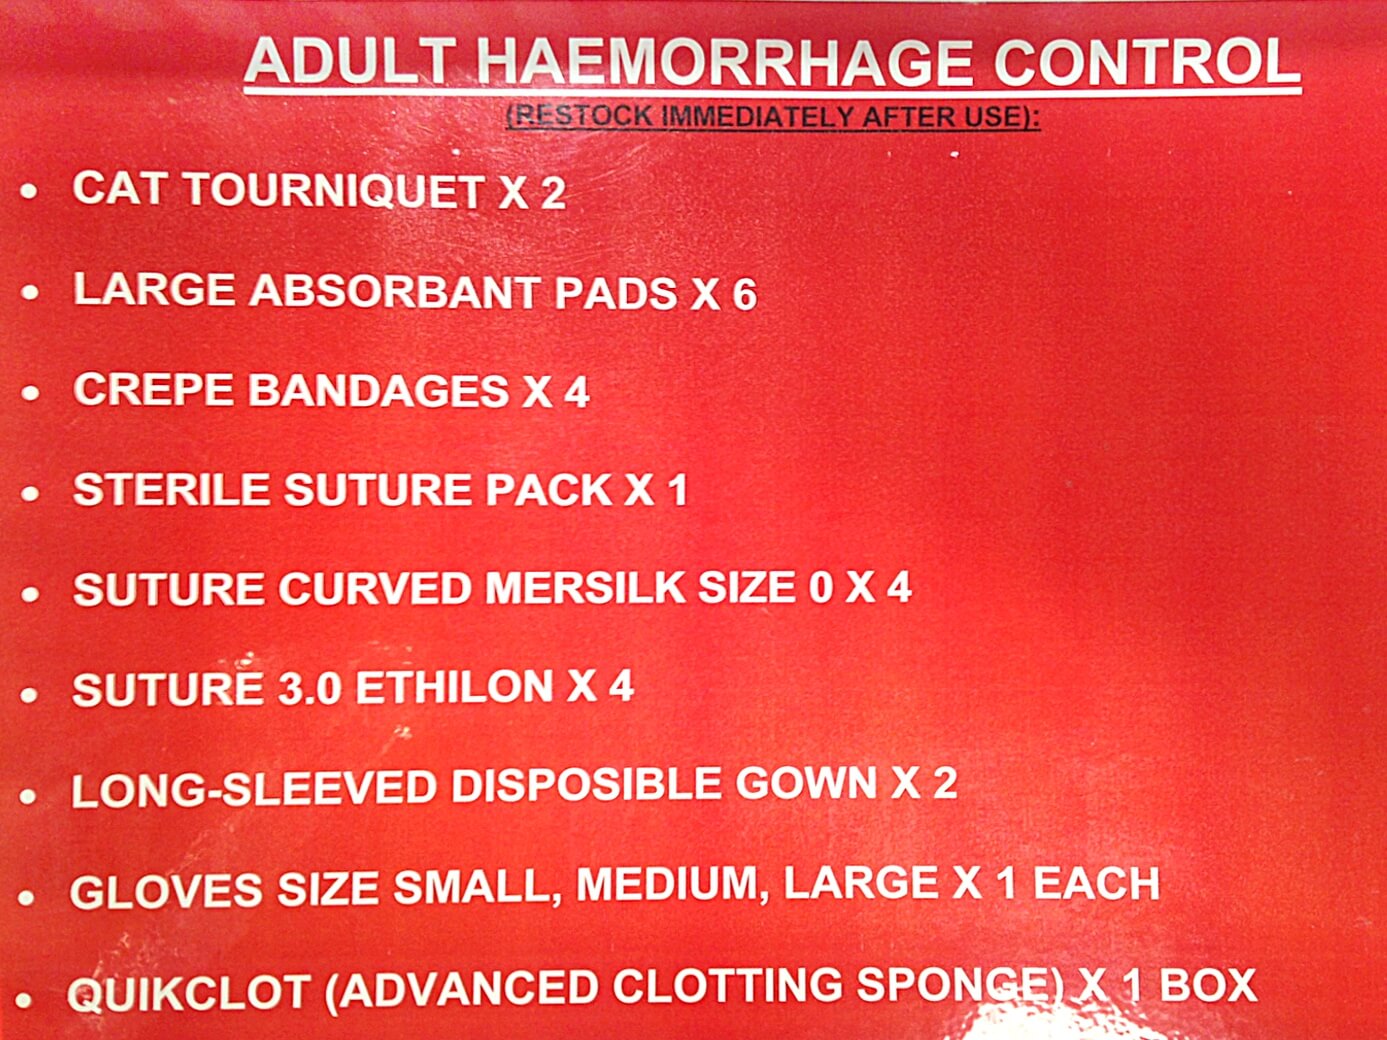 Haemorrhage Control - Stack contents.jpg